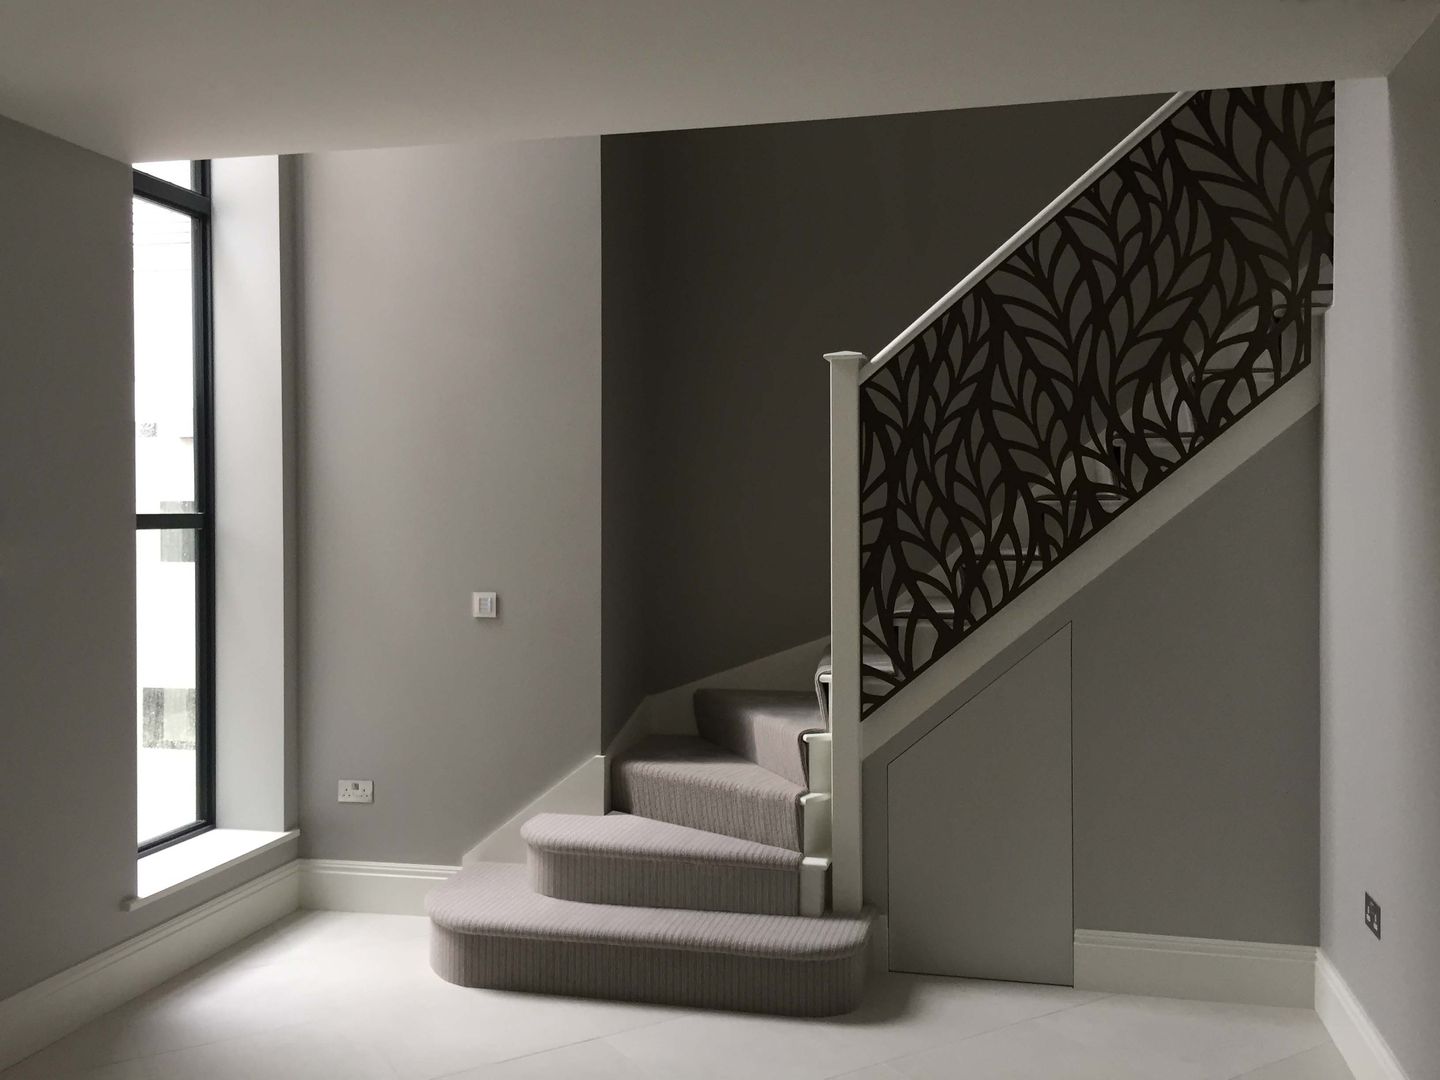 Laser cut screens - Regents Park balustrade. miles and lincoln Modern Corridor, Hallway and Staircase balustrade,laser cut screens,laser cut panels